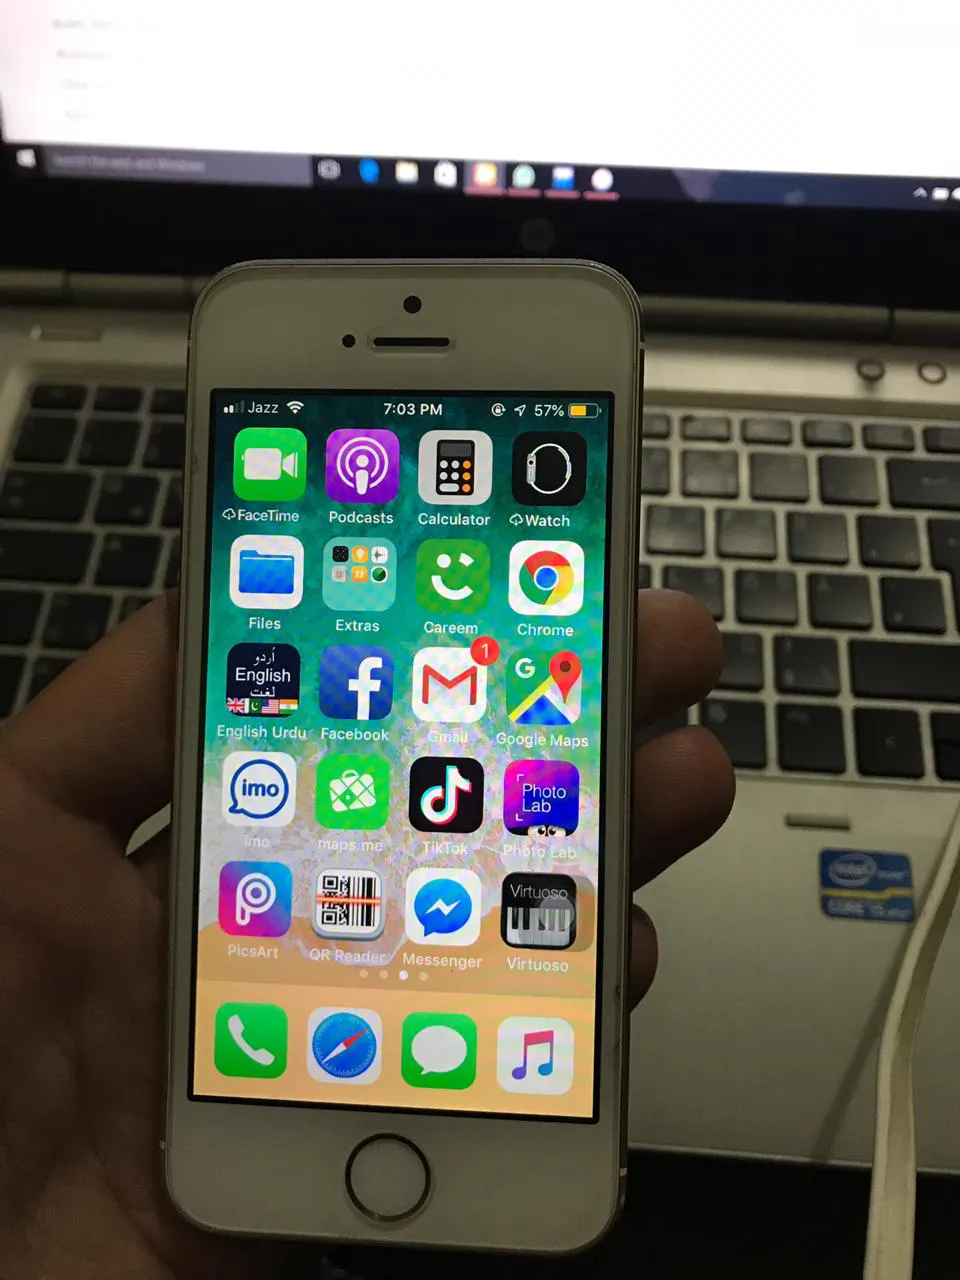 iphone 5s 9/10 condition for sale - photo 1